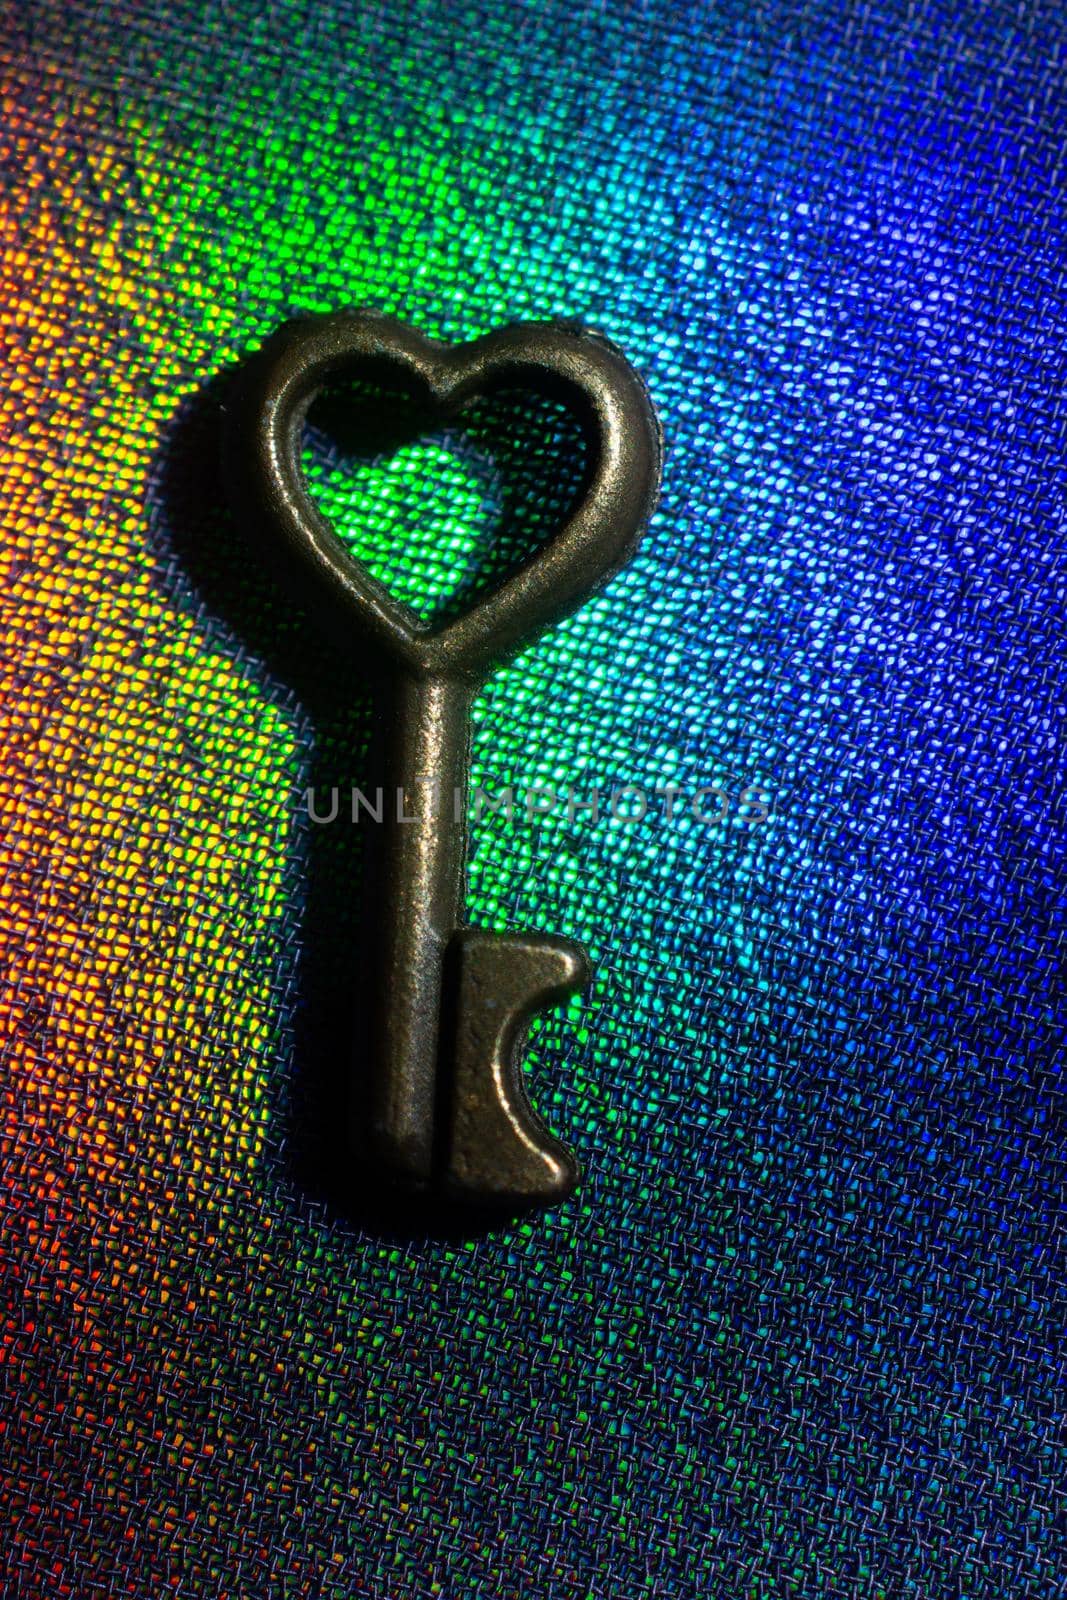 Vintage key. .Antique key. Retro key with a heart shape on  on colorful fabric  by berkay